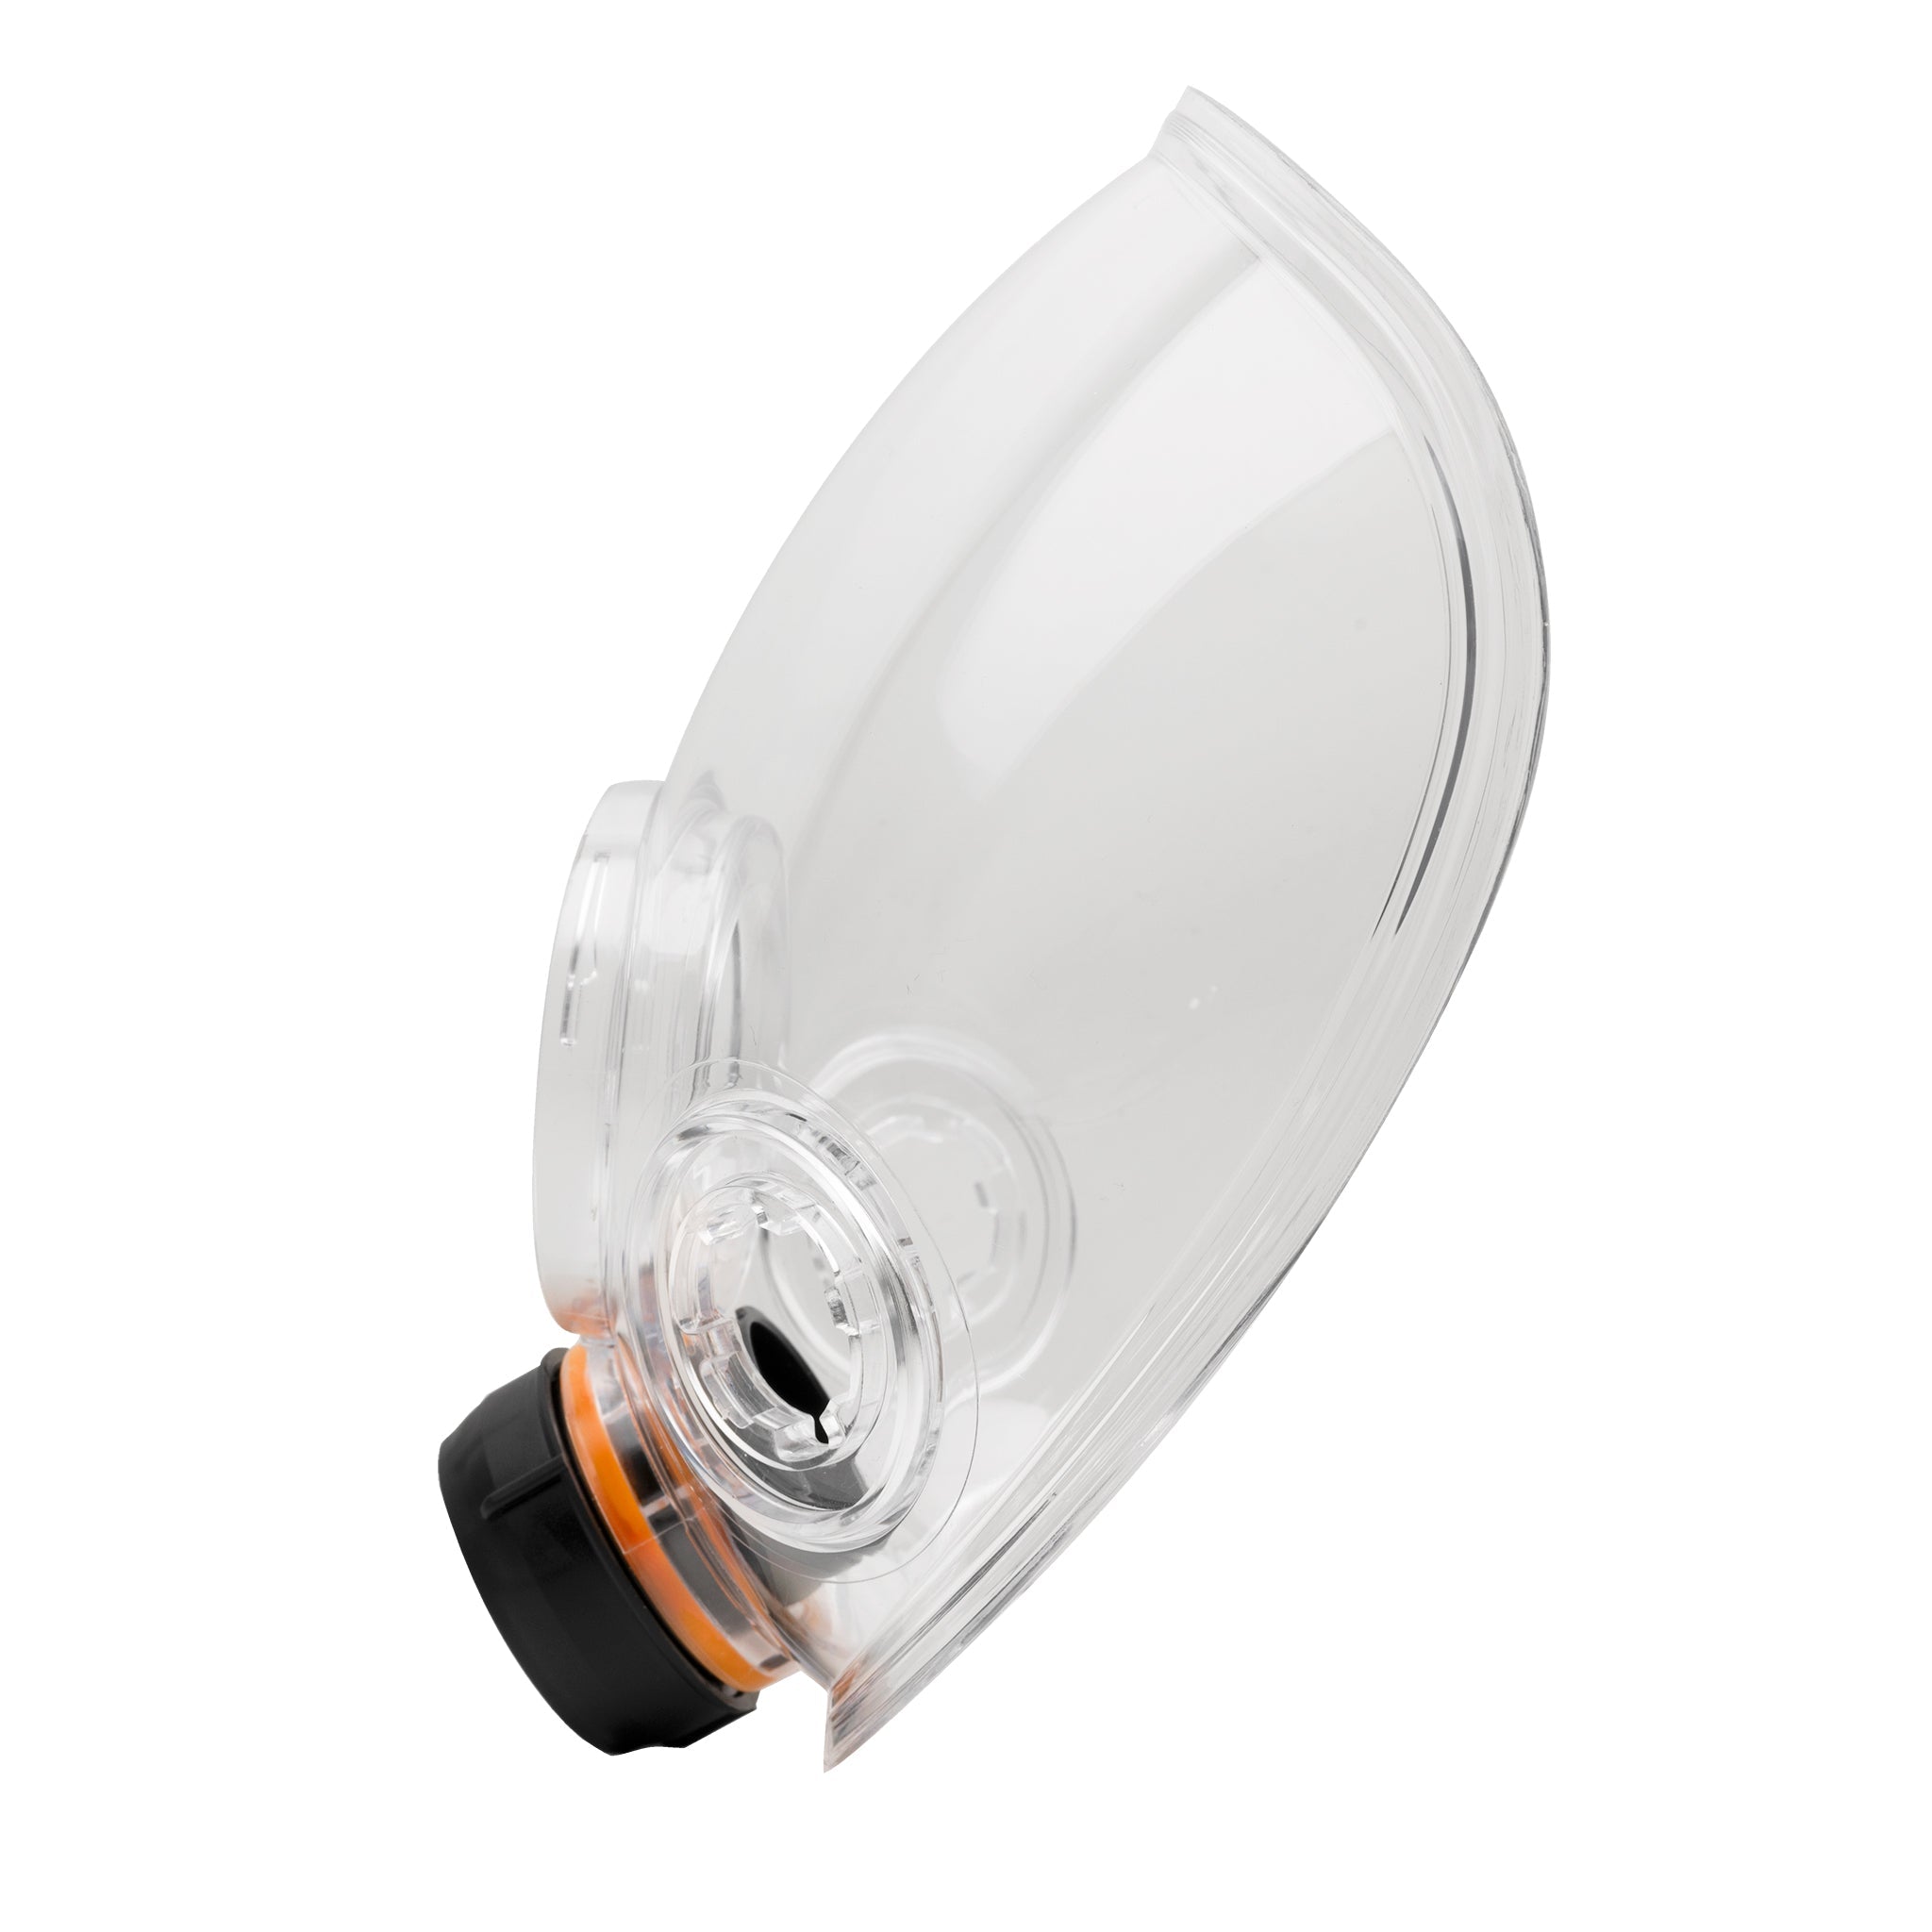 Load image into Gallery viewer, Full Face Respirator Replacement Face Shield and Exhaust Valve - Parcil SafetyParcil Safety